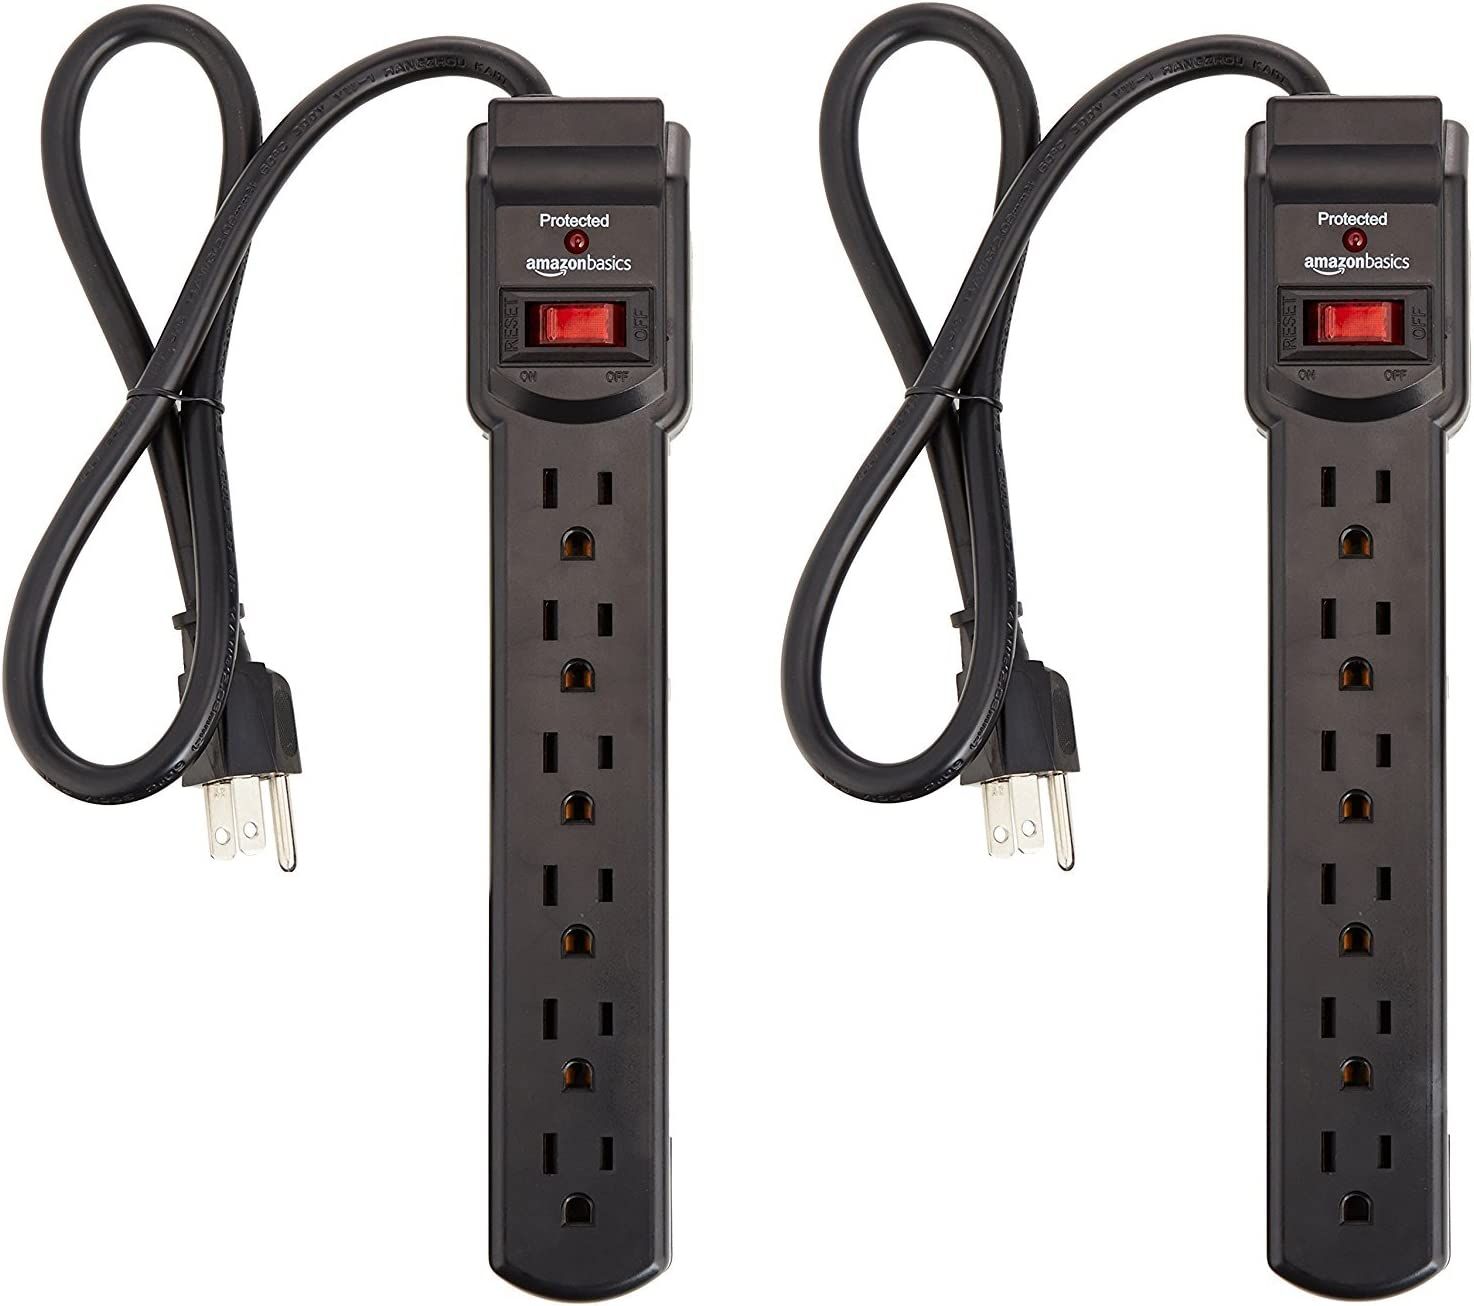 Amazon Basics 6-Outlet Surge Protector pack